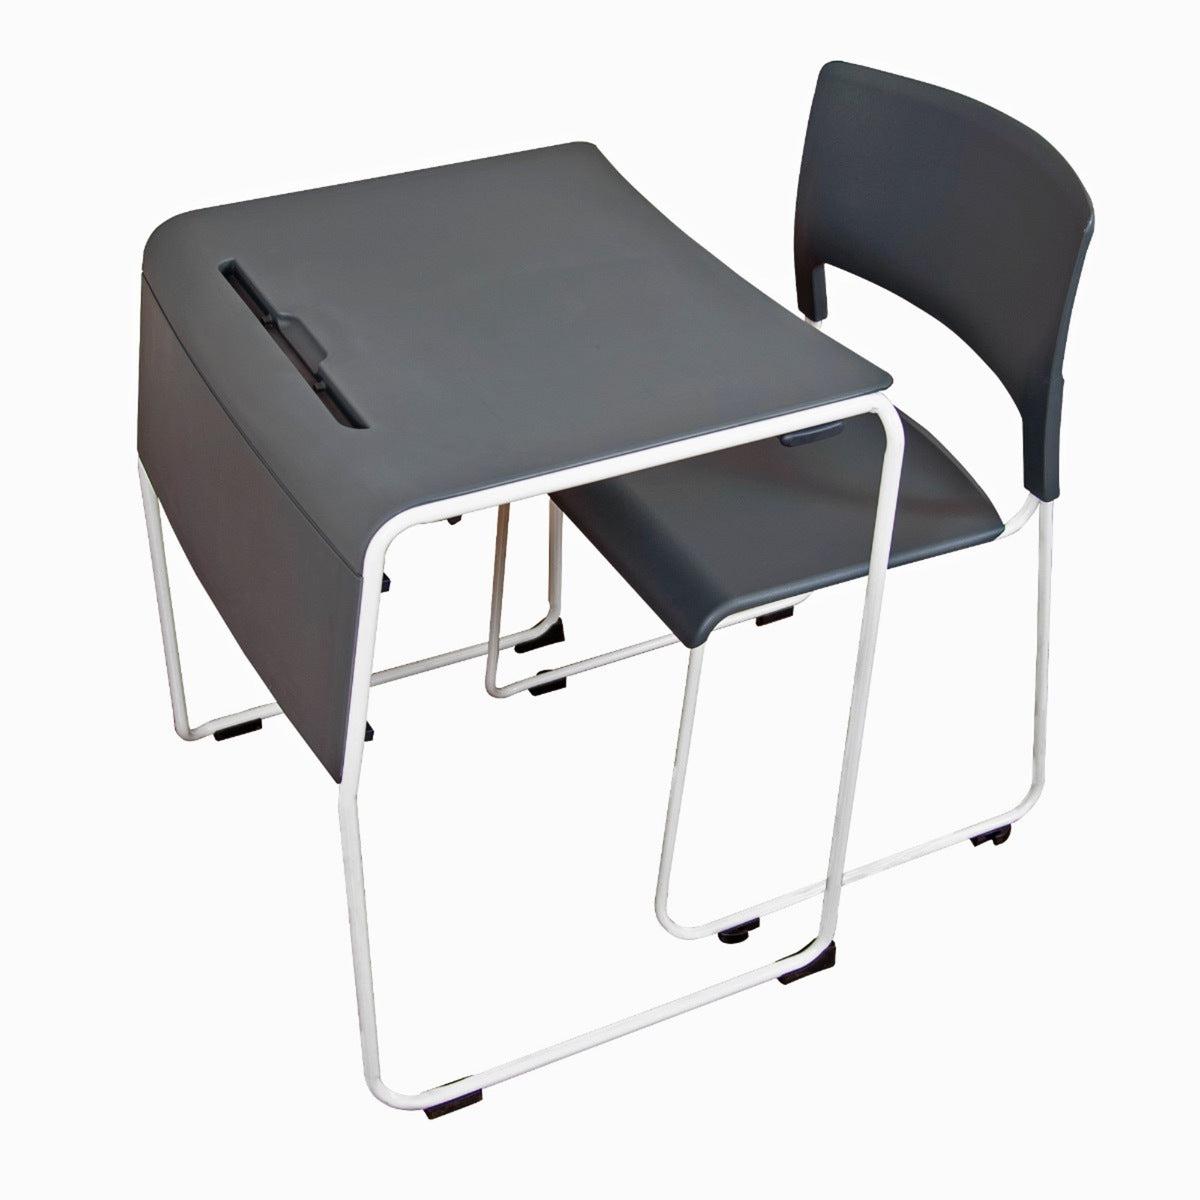 Lightweight Stackable Student Desk and Chair Set (1 Desk and 1 Chair)